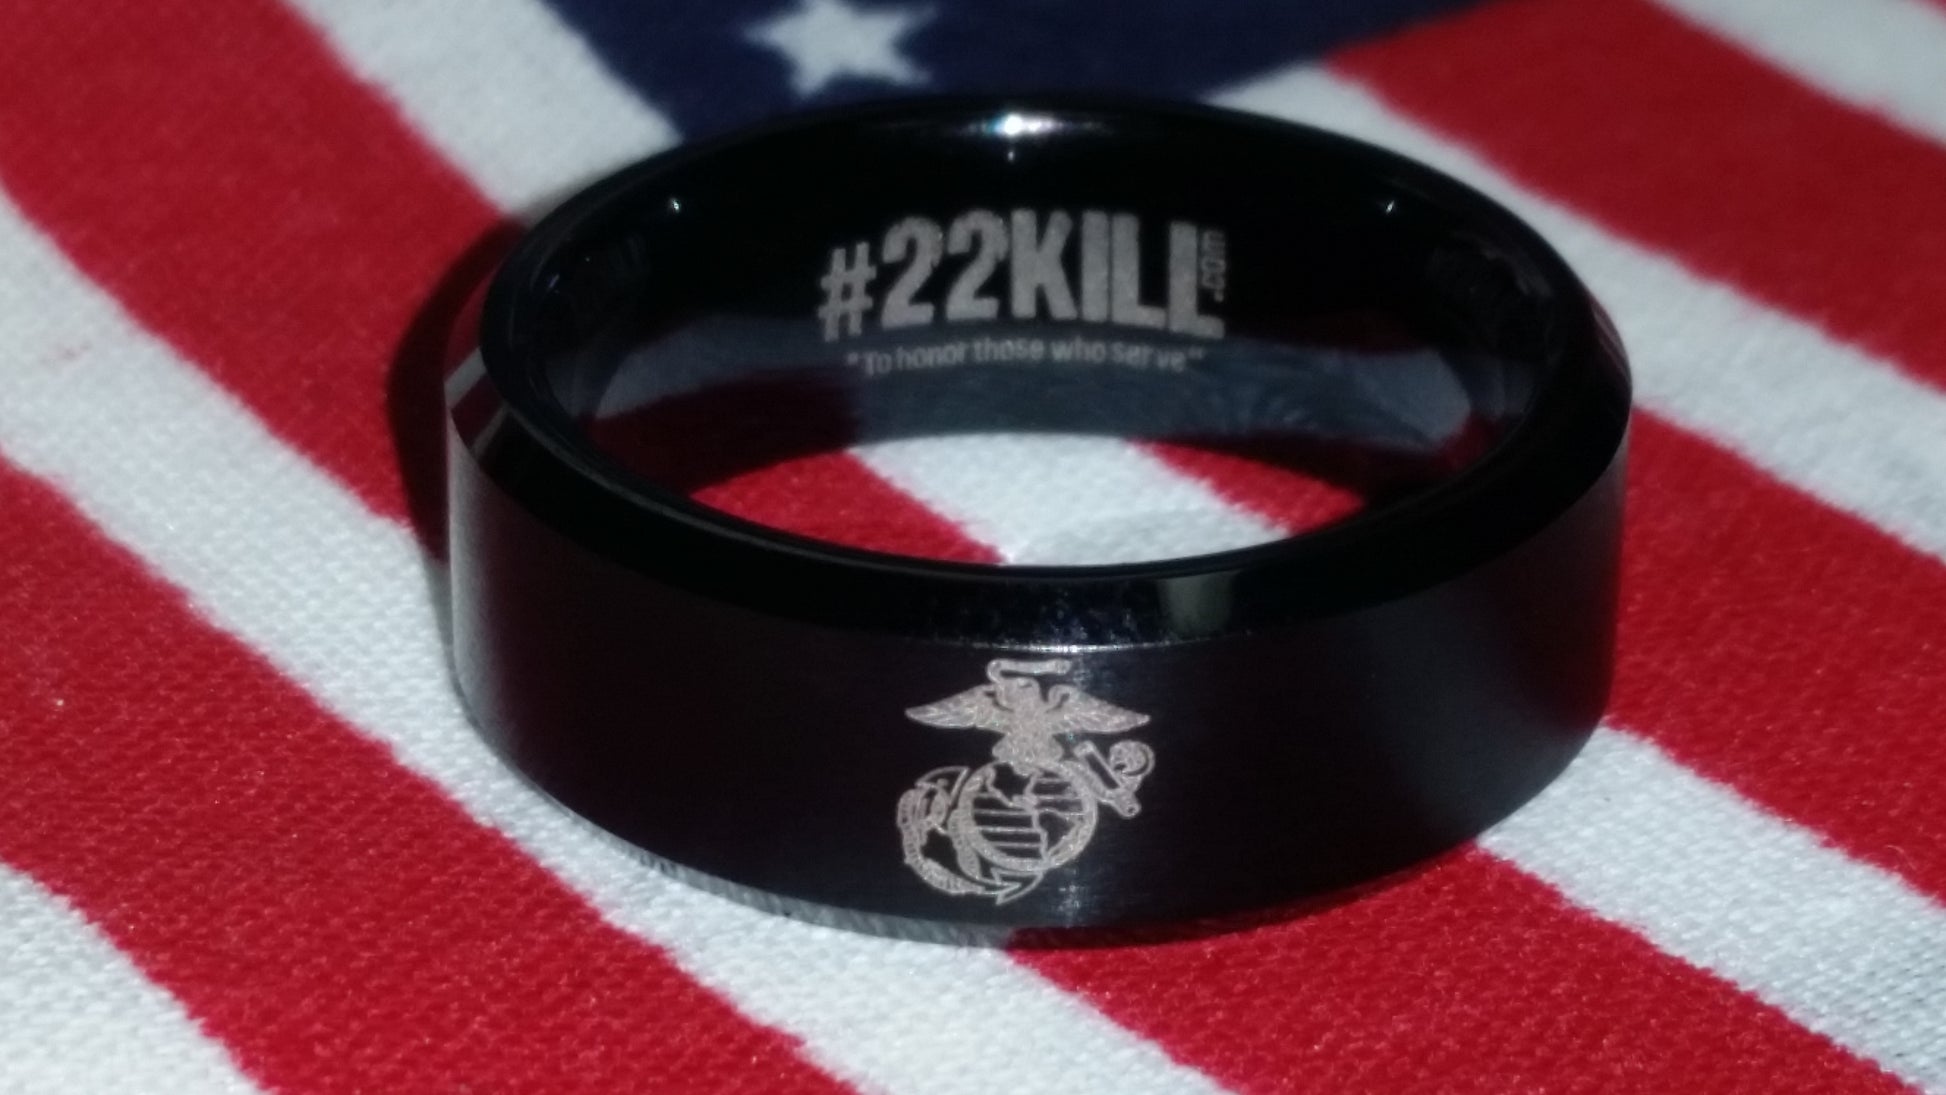 #22KILL USMC engraved honor ring by One Tribe Foundation.